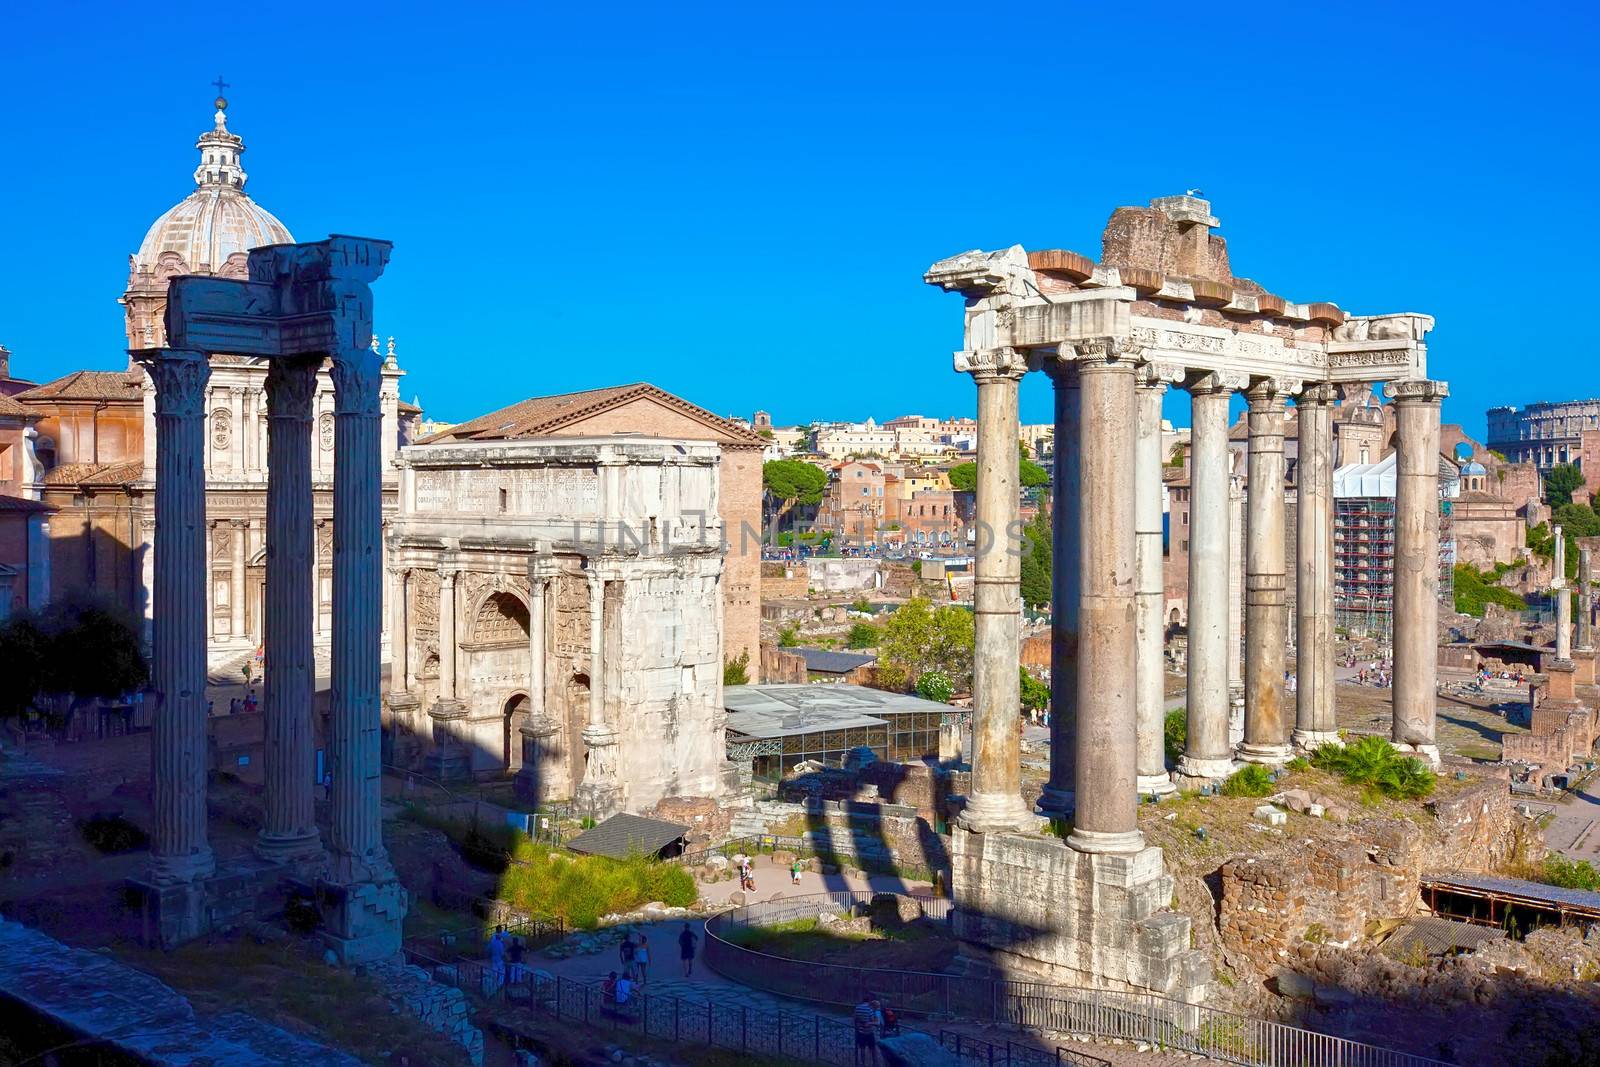 Ruins of famous ancient Roman Forum in Rome, Italy